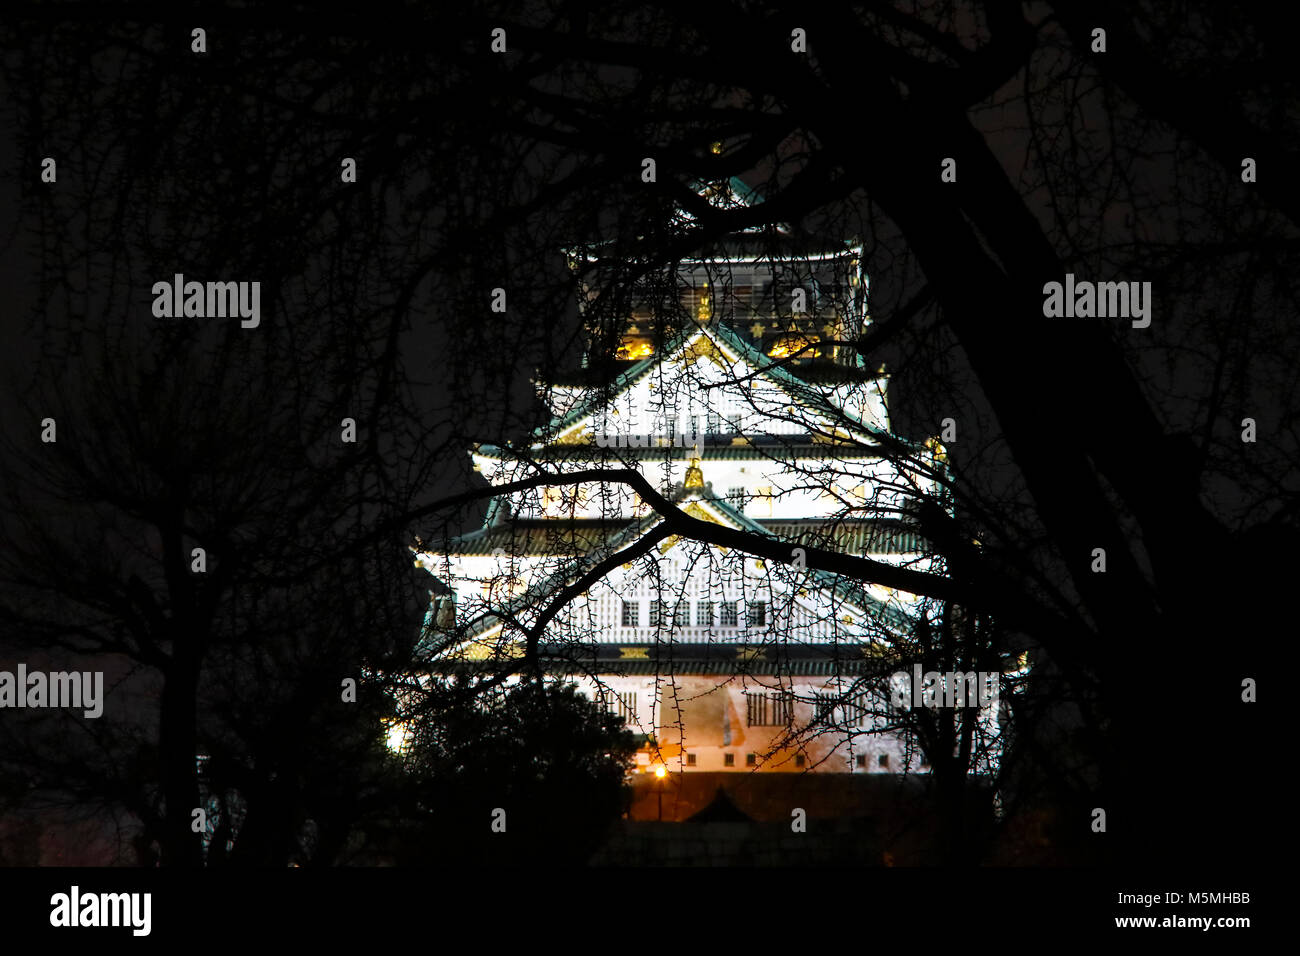 osaka Castle : Osaka Castle is a Japanese castle in Chūō-ku, Osaka, Japan. The castle is one of Japan's most famous landmarks and it played a major ro Stock Photo